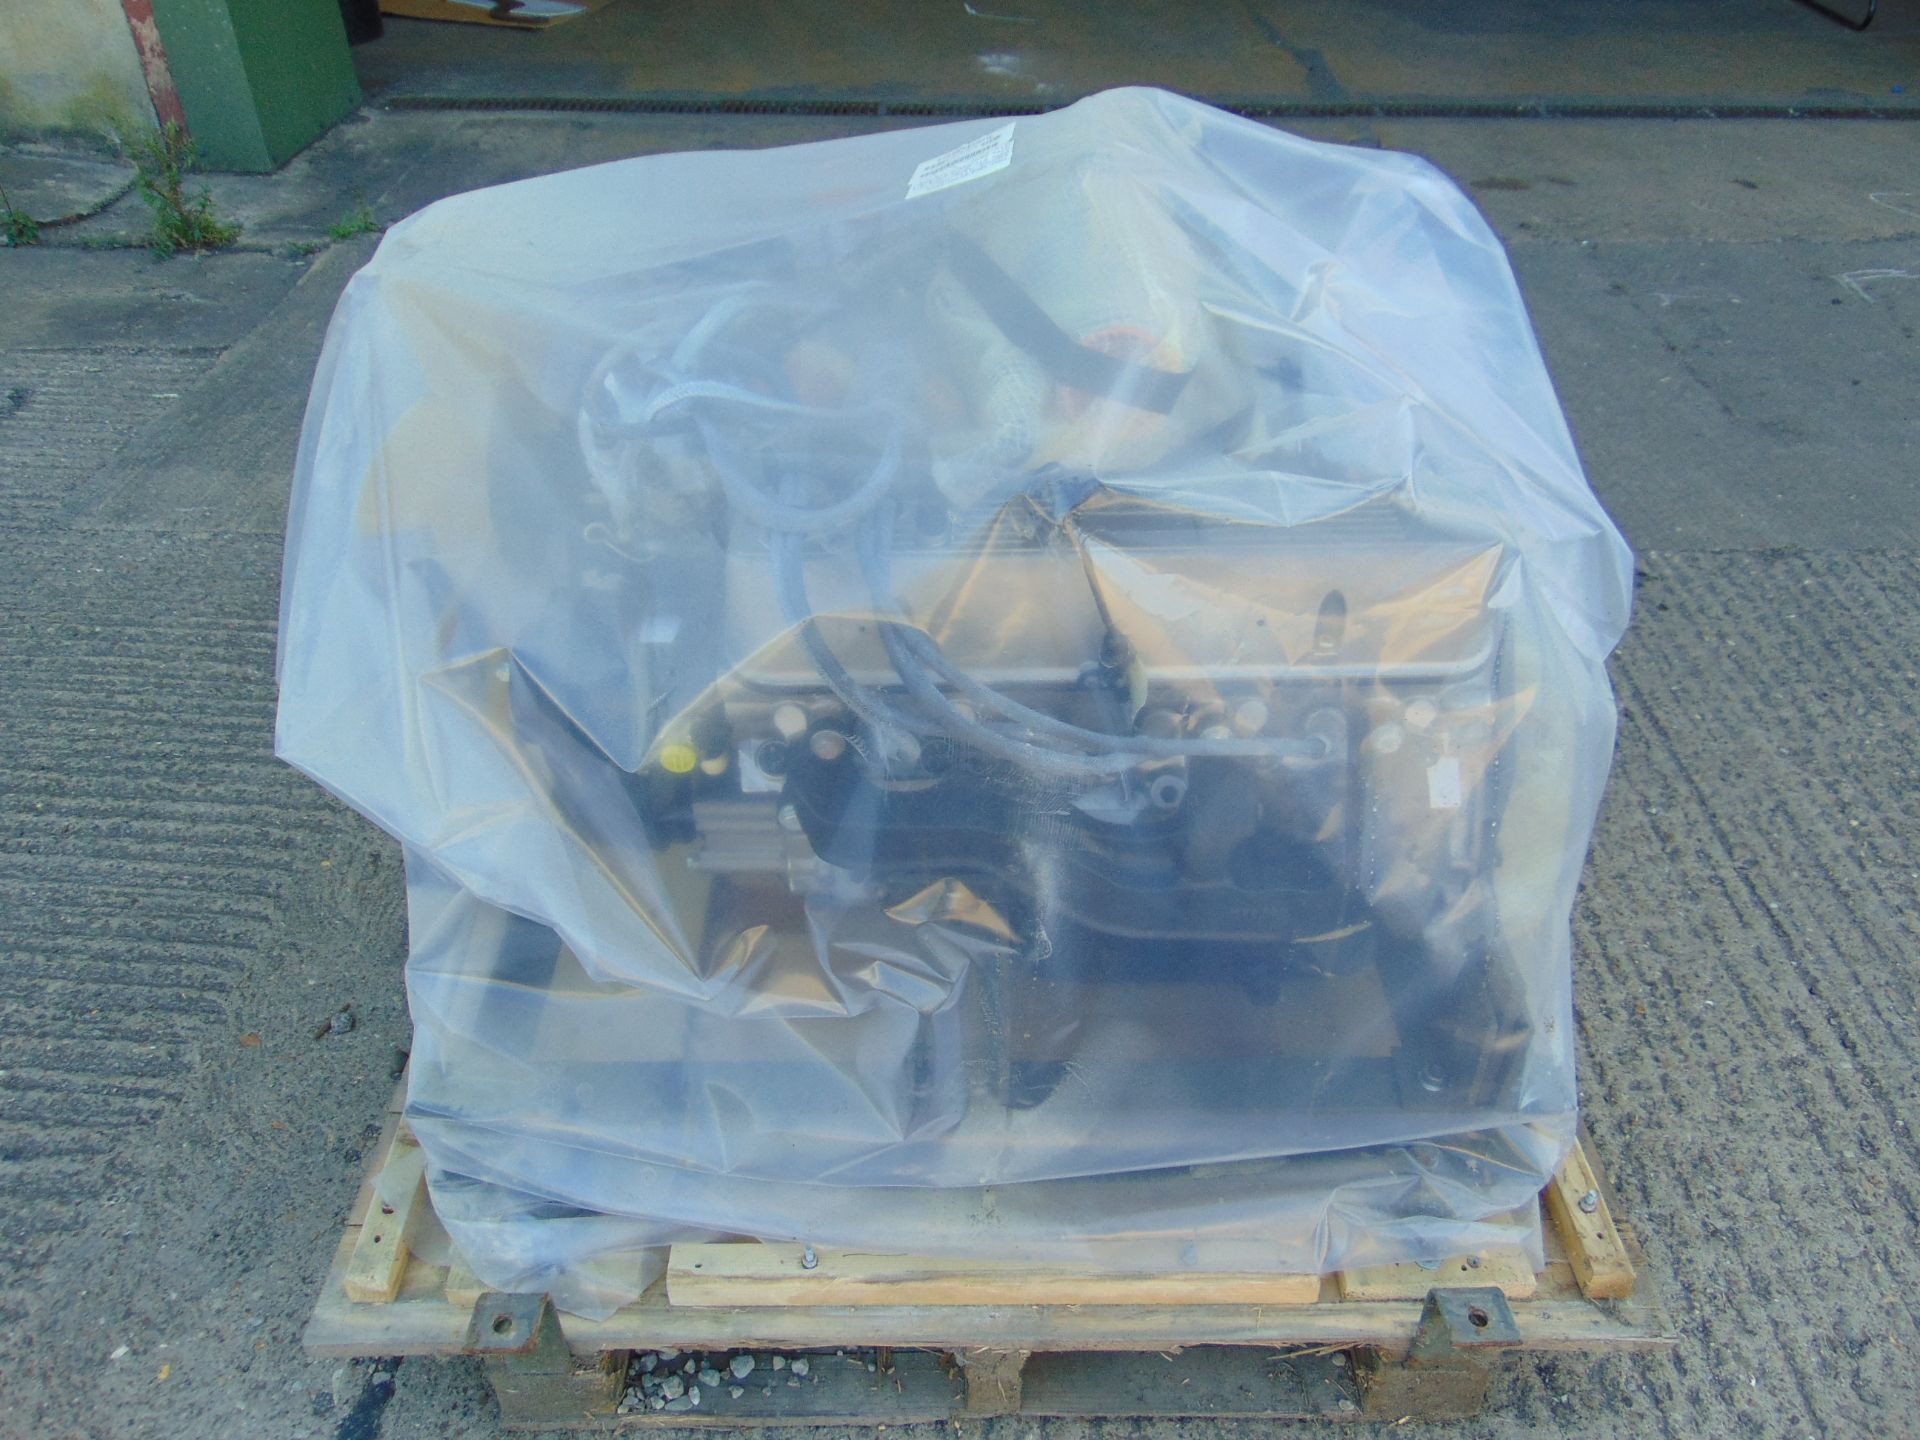 Fully Reconditioned Land Rover V8 Engine c/w all Accessories, as shown in Crate etc - Image 17 of 21